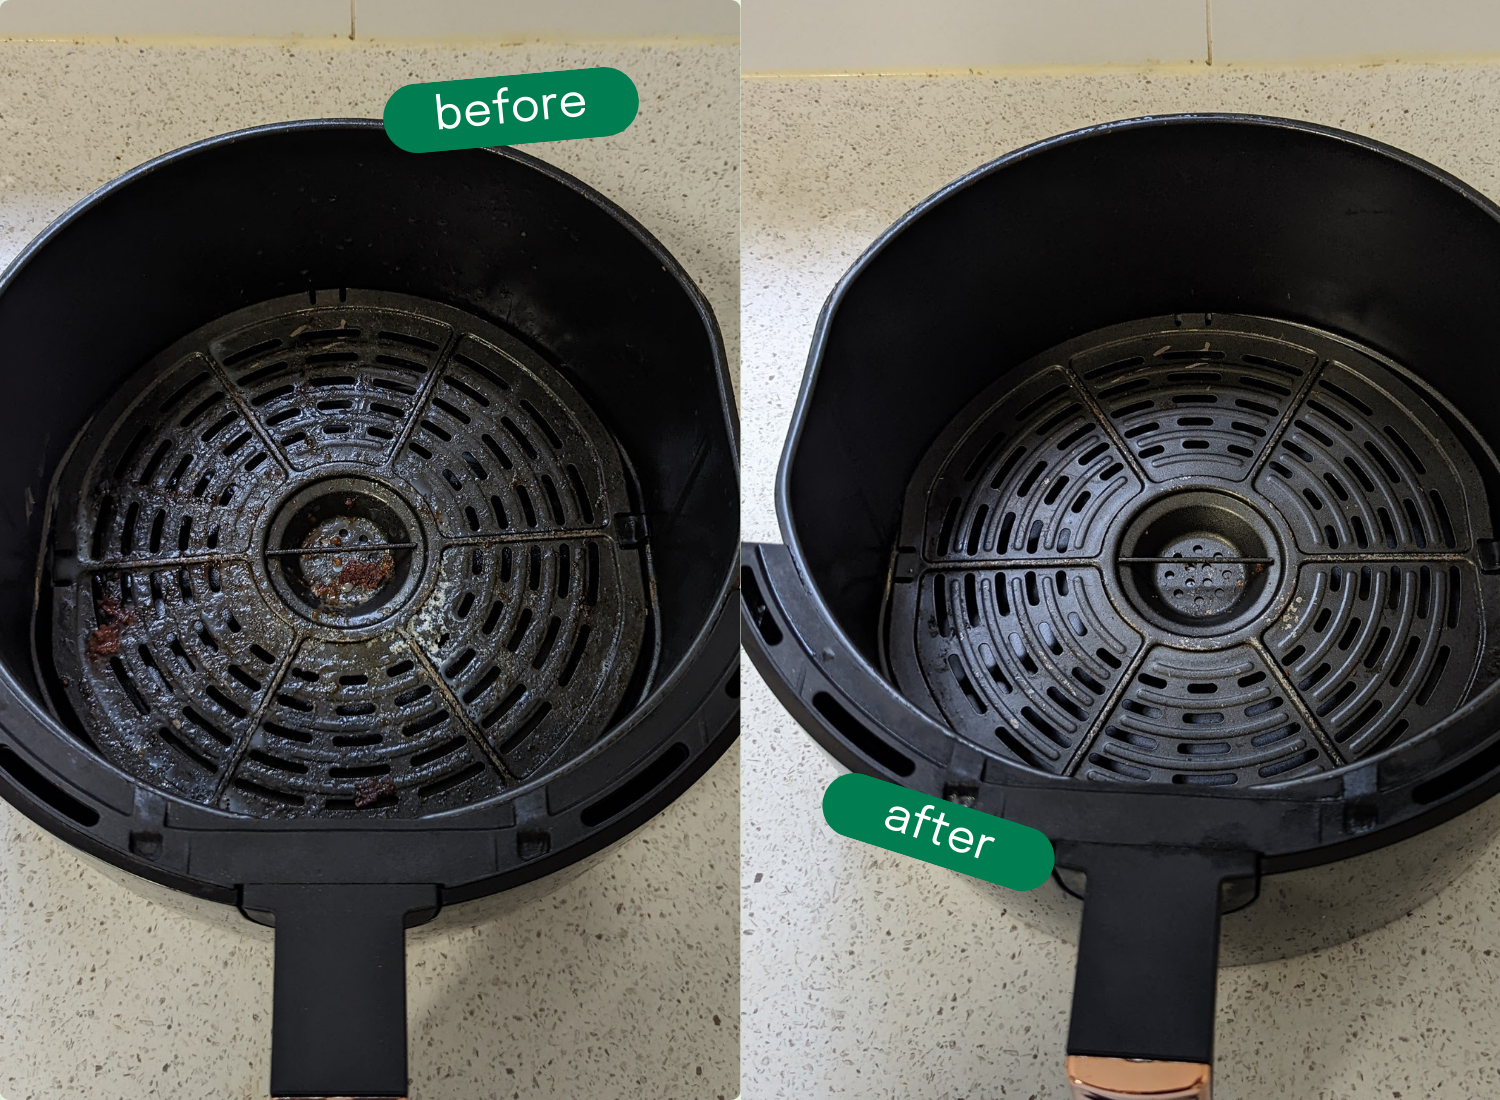 Here’s how to actually deep clean your air fryer